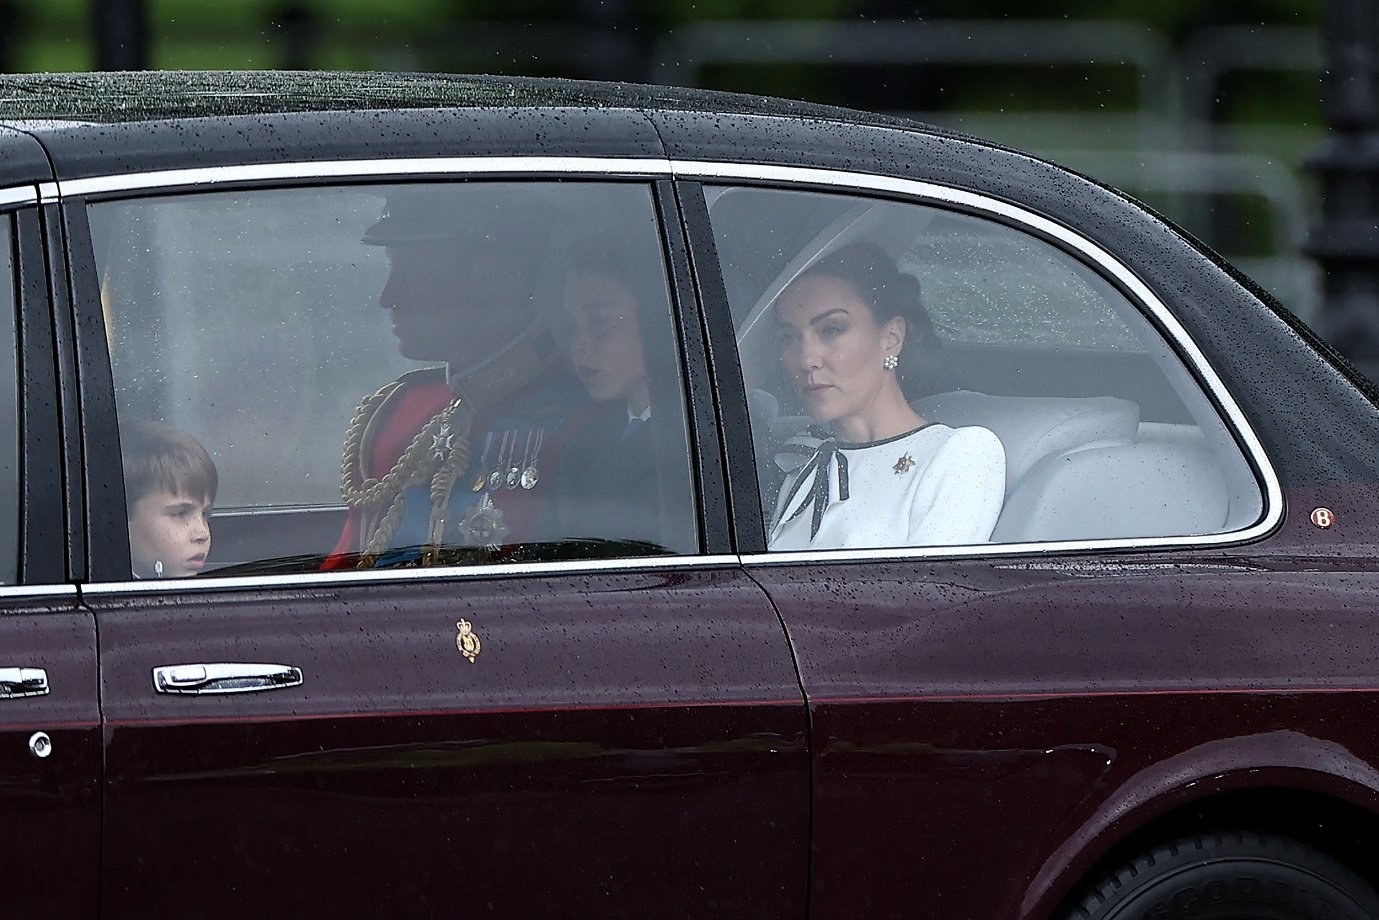 Britain's Catherine, Princess of Wales, (R) arrives with Britain's Prince William, Prince of Wales, (rear C) and their children Britain's Prince George of Wales (C) and Britain's Prince Louis of Wales (L) to Buckingham Palace before the King's Birthday Parade "Trooping the Colour" in London on June 15, 2024. The ceremony of Trooping the Colour is believed to have first been performed during the reign of King Charles II. Since 1748, the Trooping of the Colour has marked the official birthday of the British Sovereign. Over 1500 parading soldiers and almost 300 horses take part in the event. (Photo by HENRY NICHOLLS / AFP)